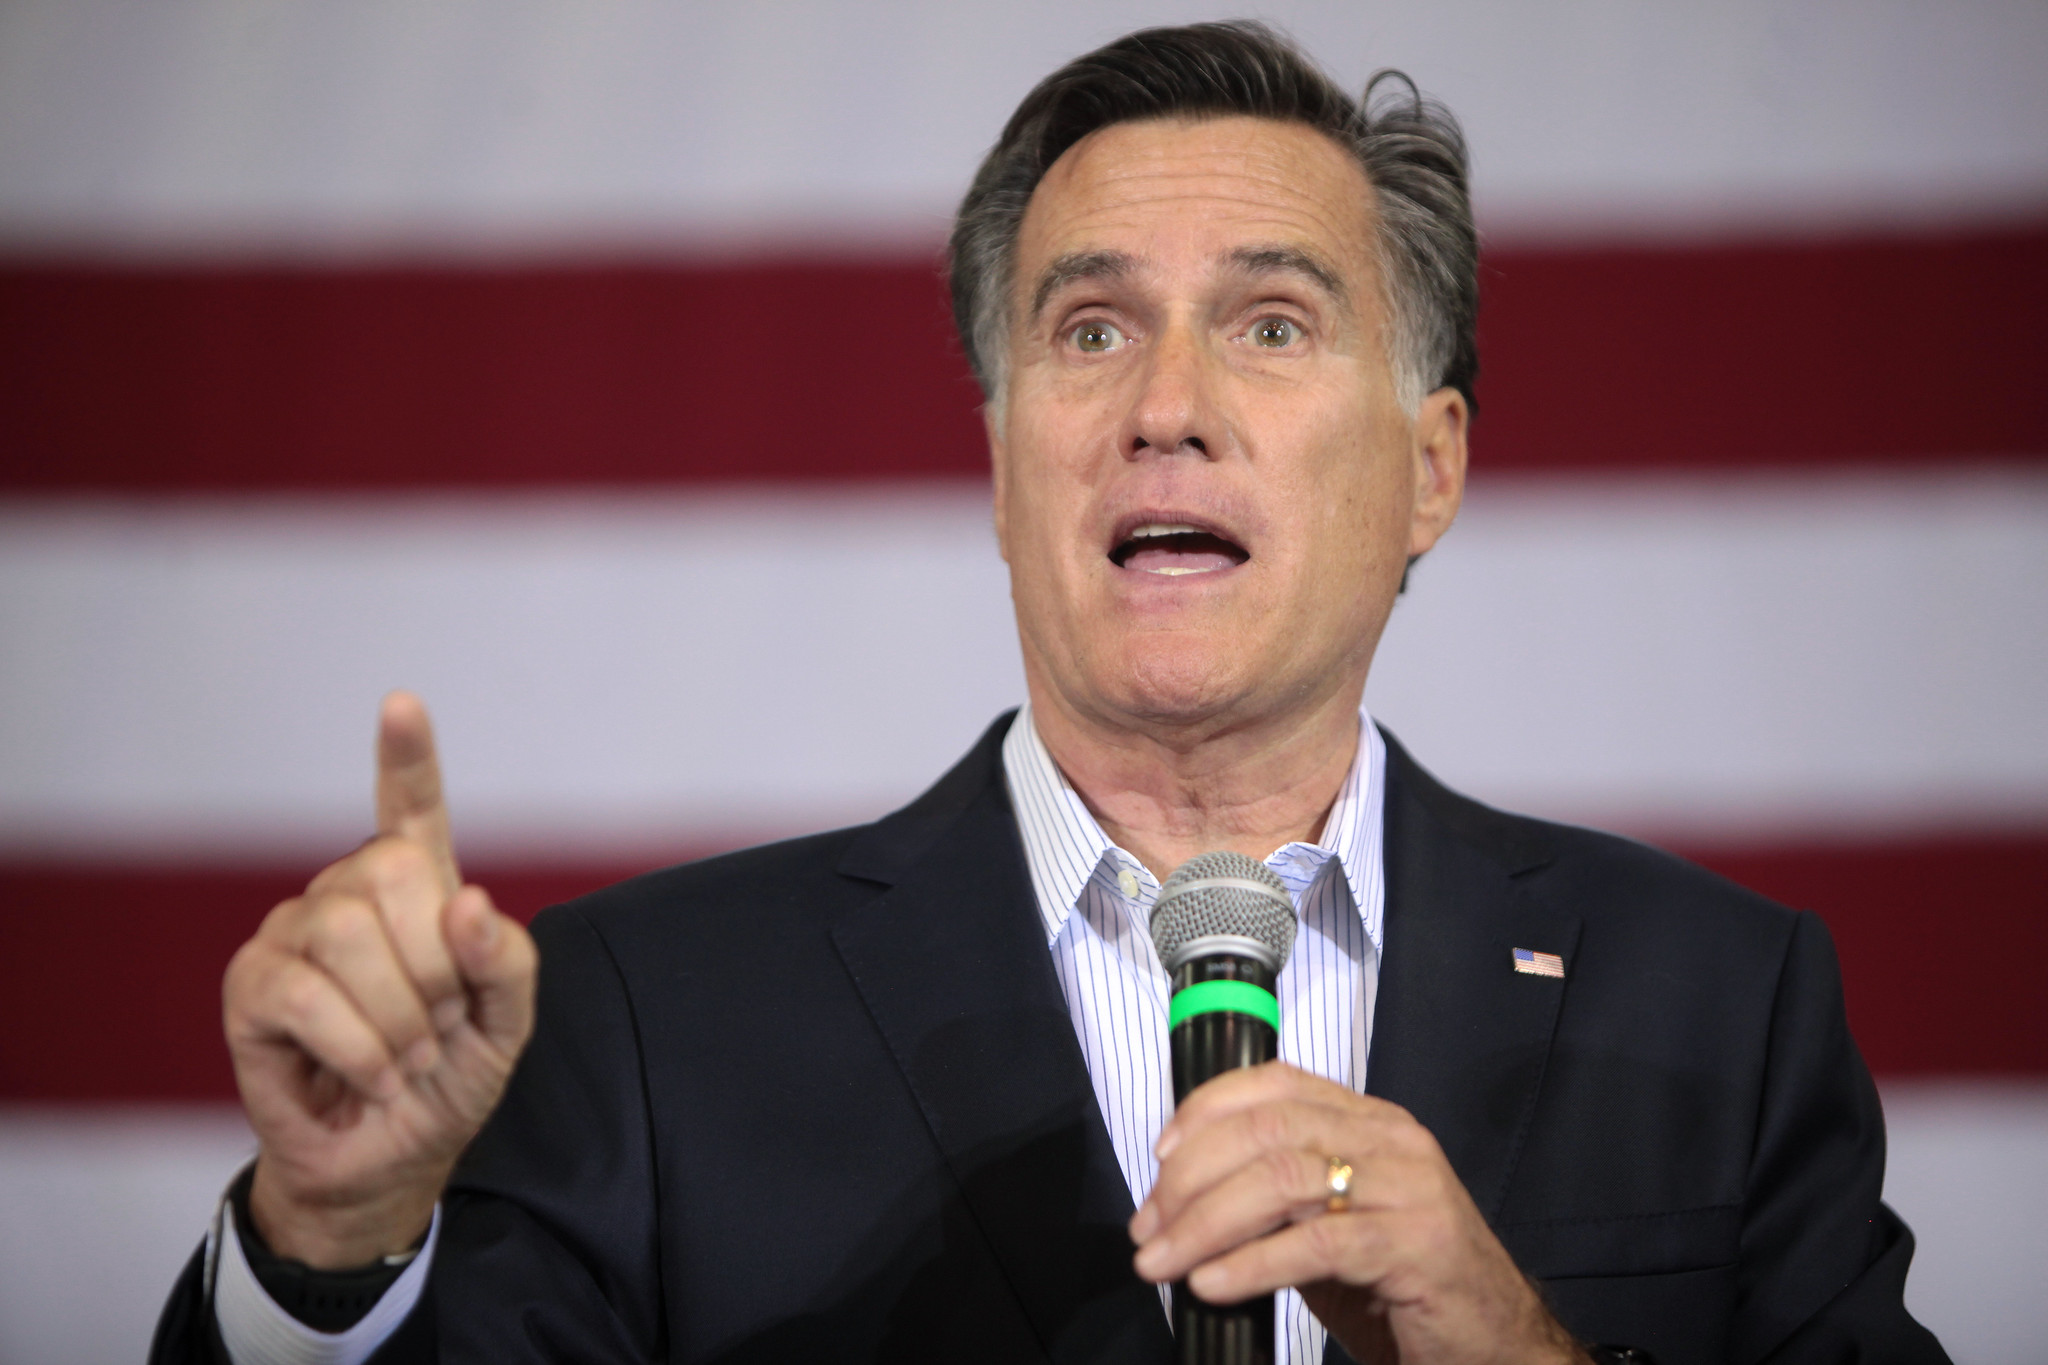 Mitt Romney delivers totally weak-ass response to racist Trump tweets / Boing Boing